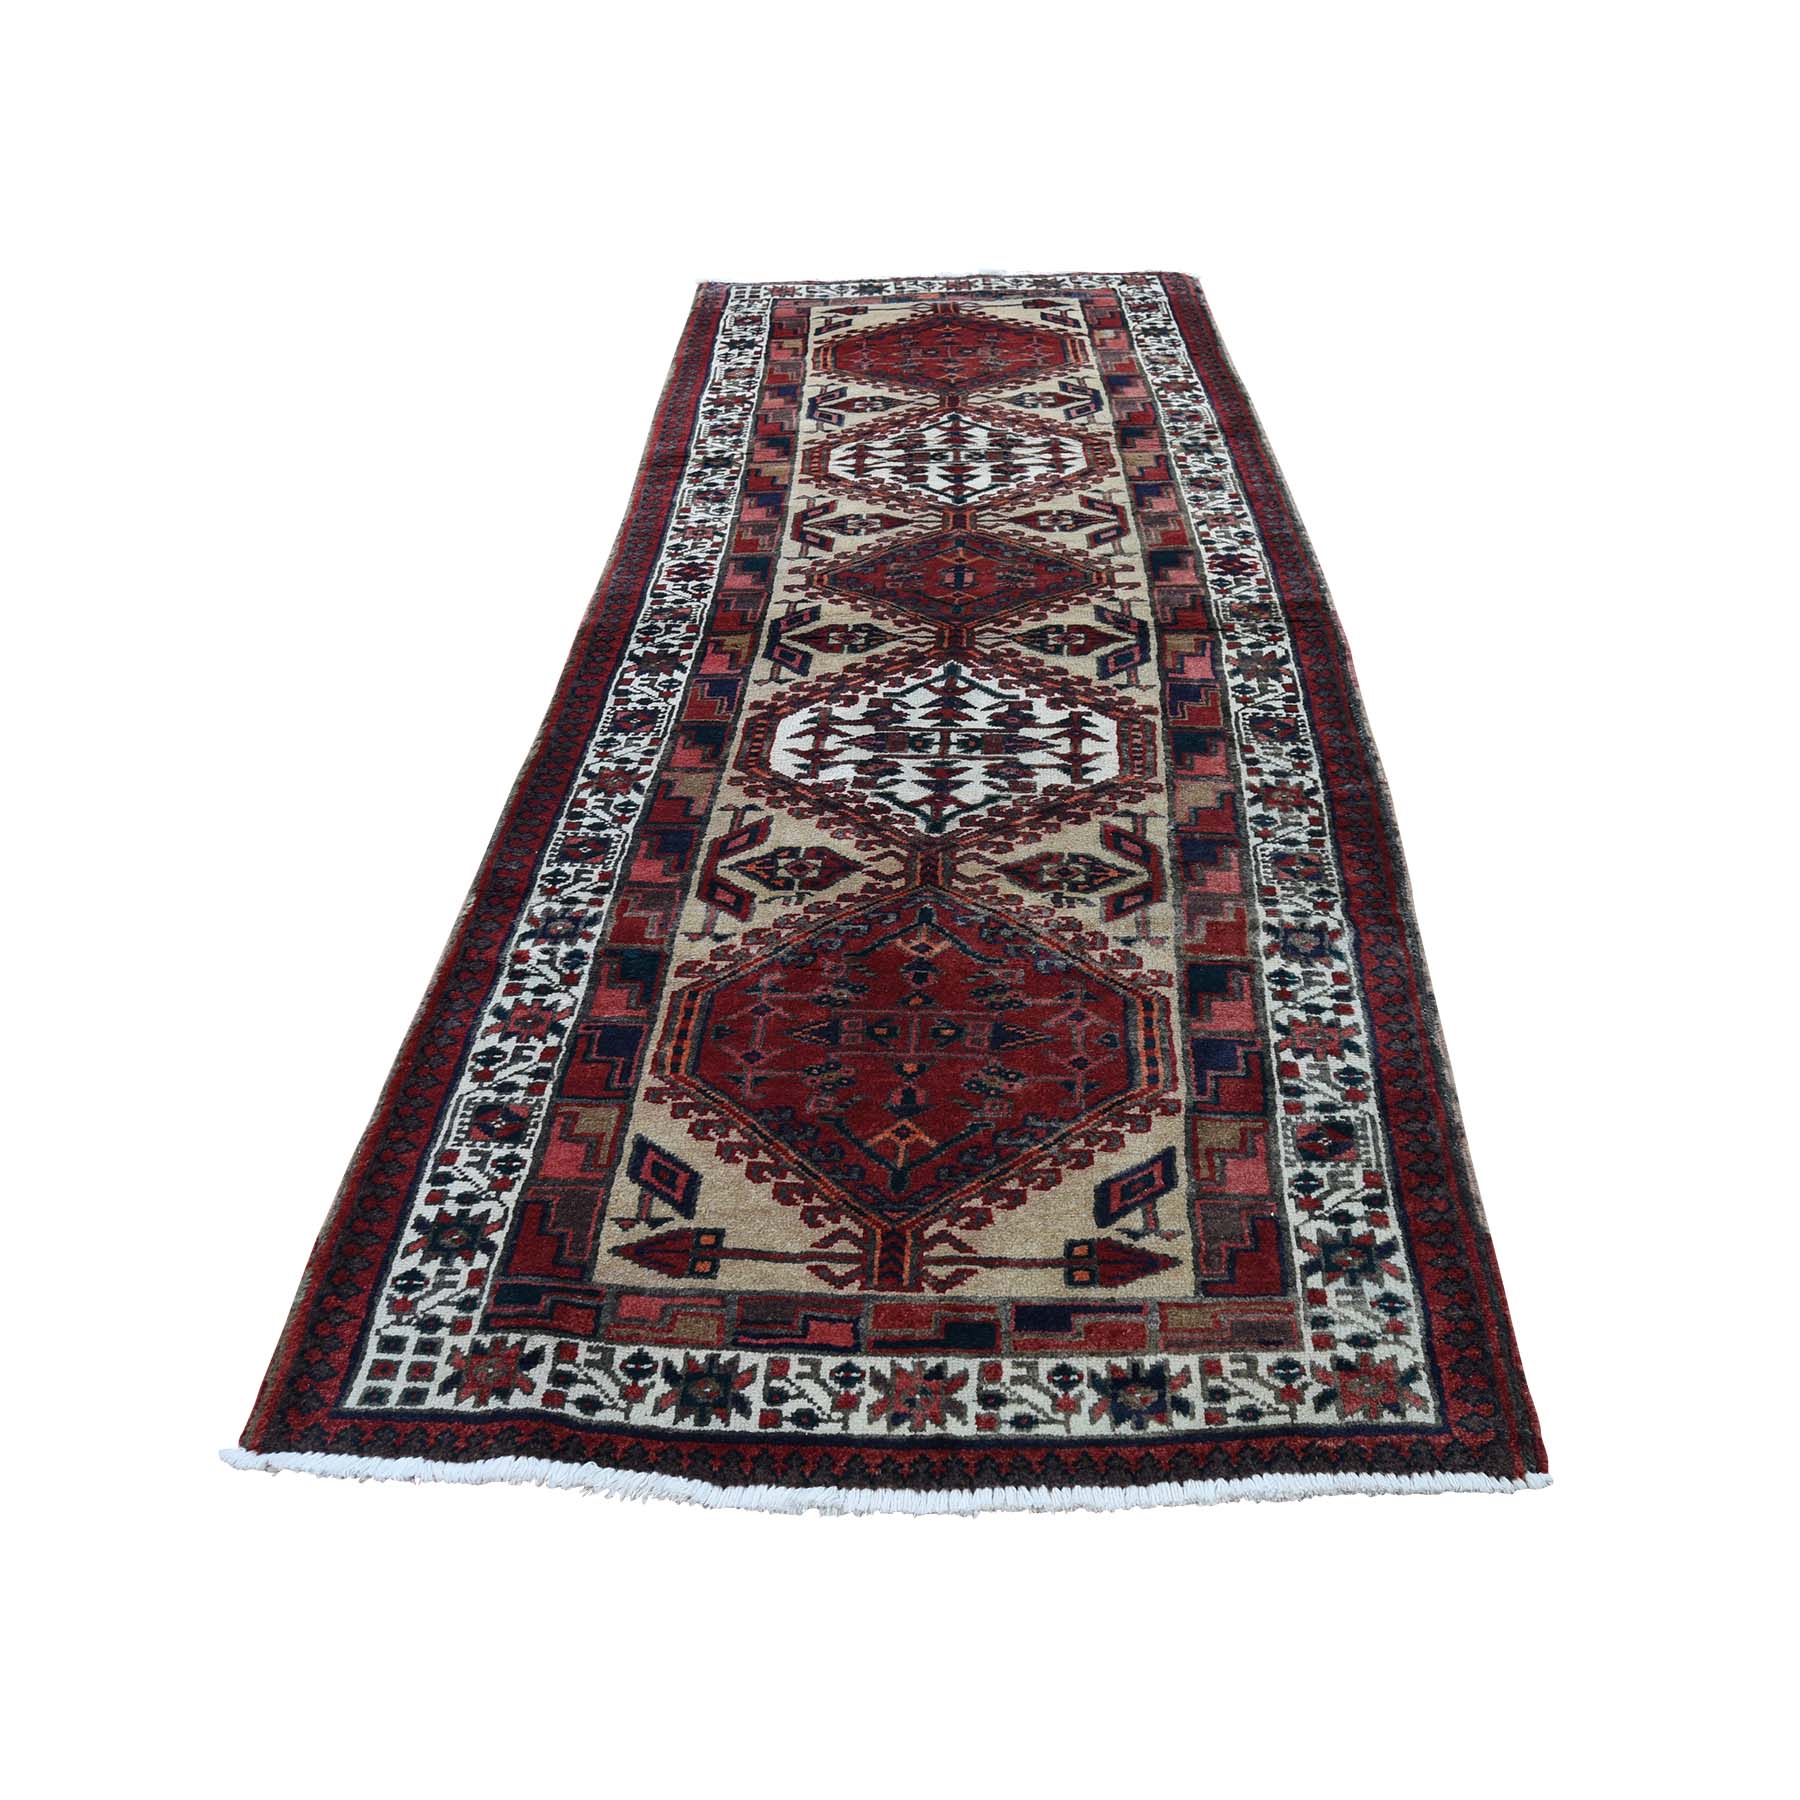 3-5 x10-5  Pure Wool Semi Antique Persian Serab Wide Runner Hand-Knotted Oriental Rug 